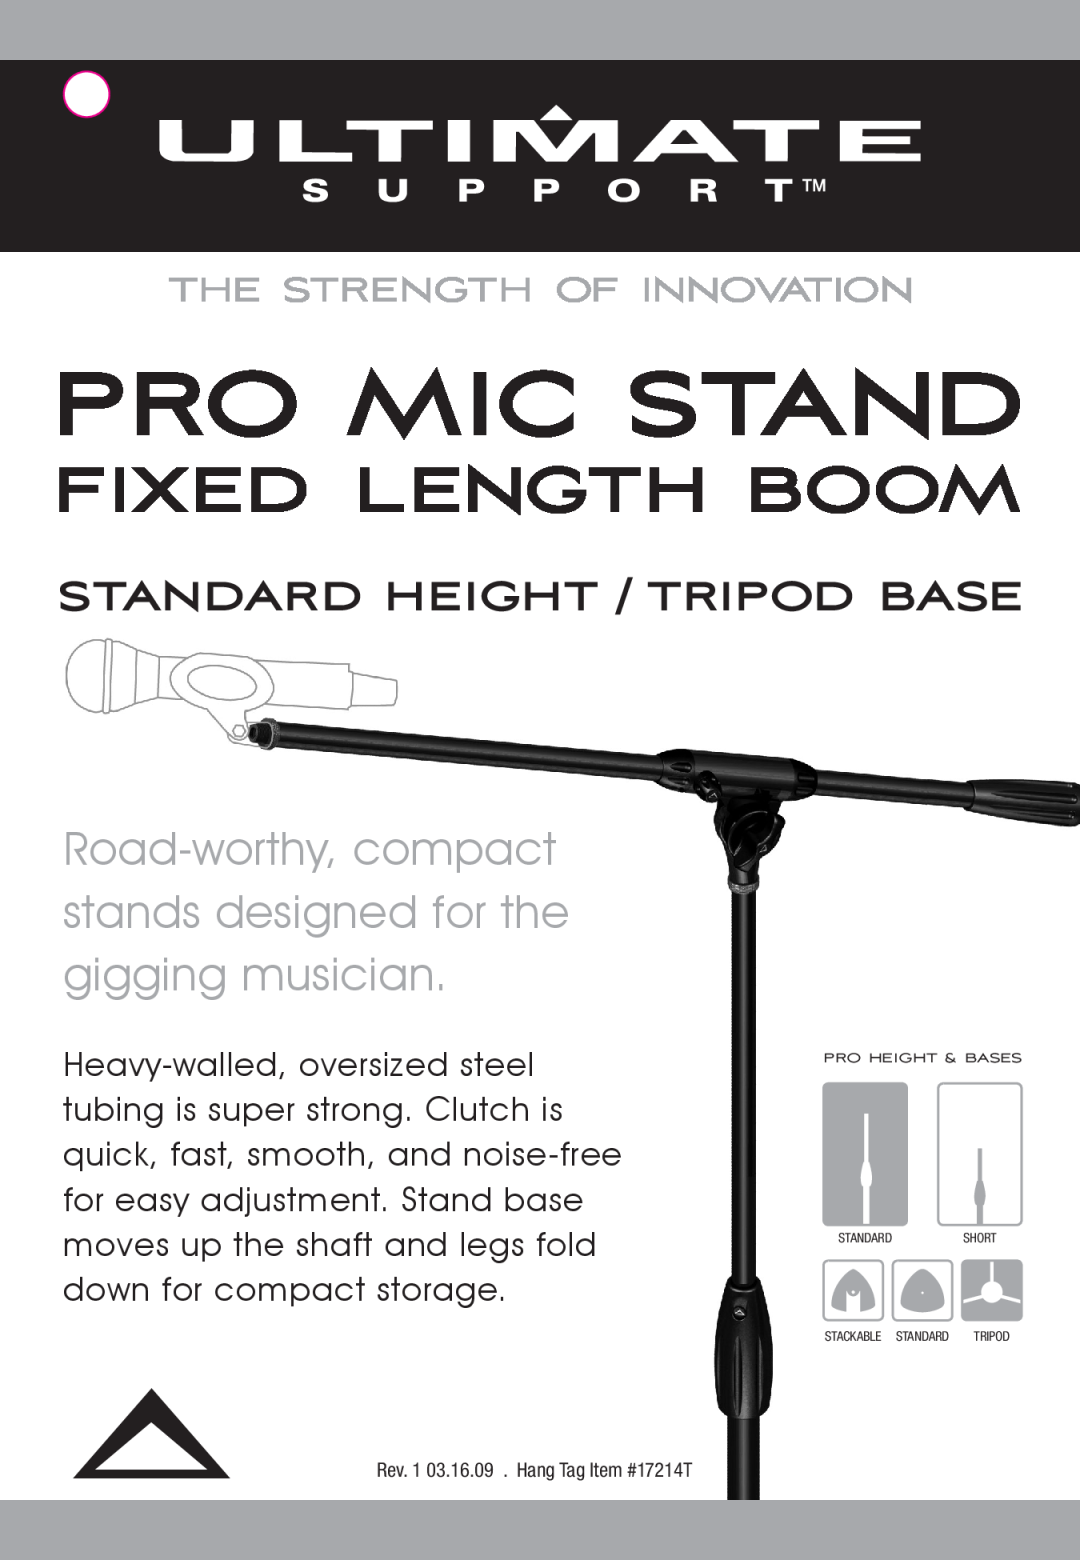 Ultimate Support Systems 17214T manual Pro Mic Stand, Fixed Length Boom, Standard Height / Tripod Base, Pro Height & Bases 